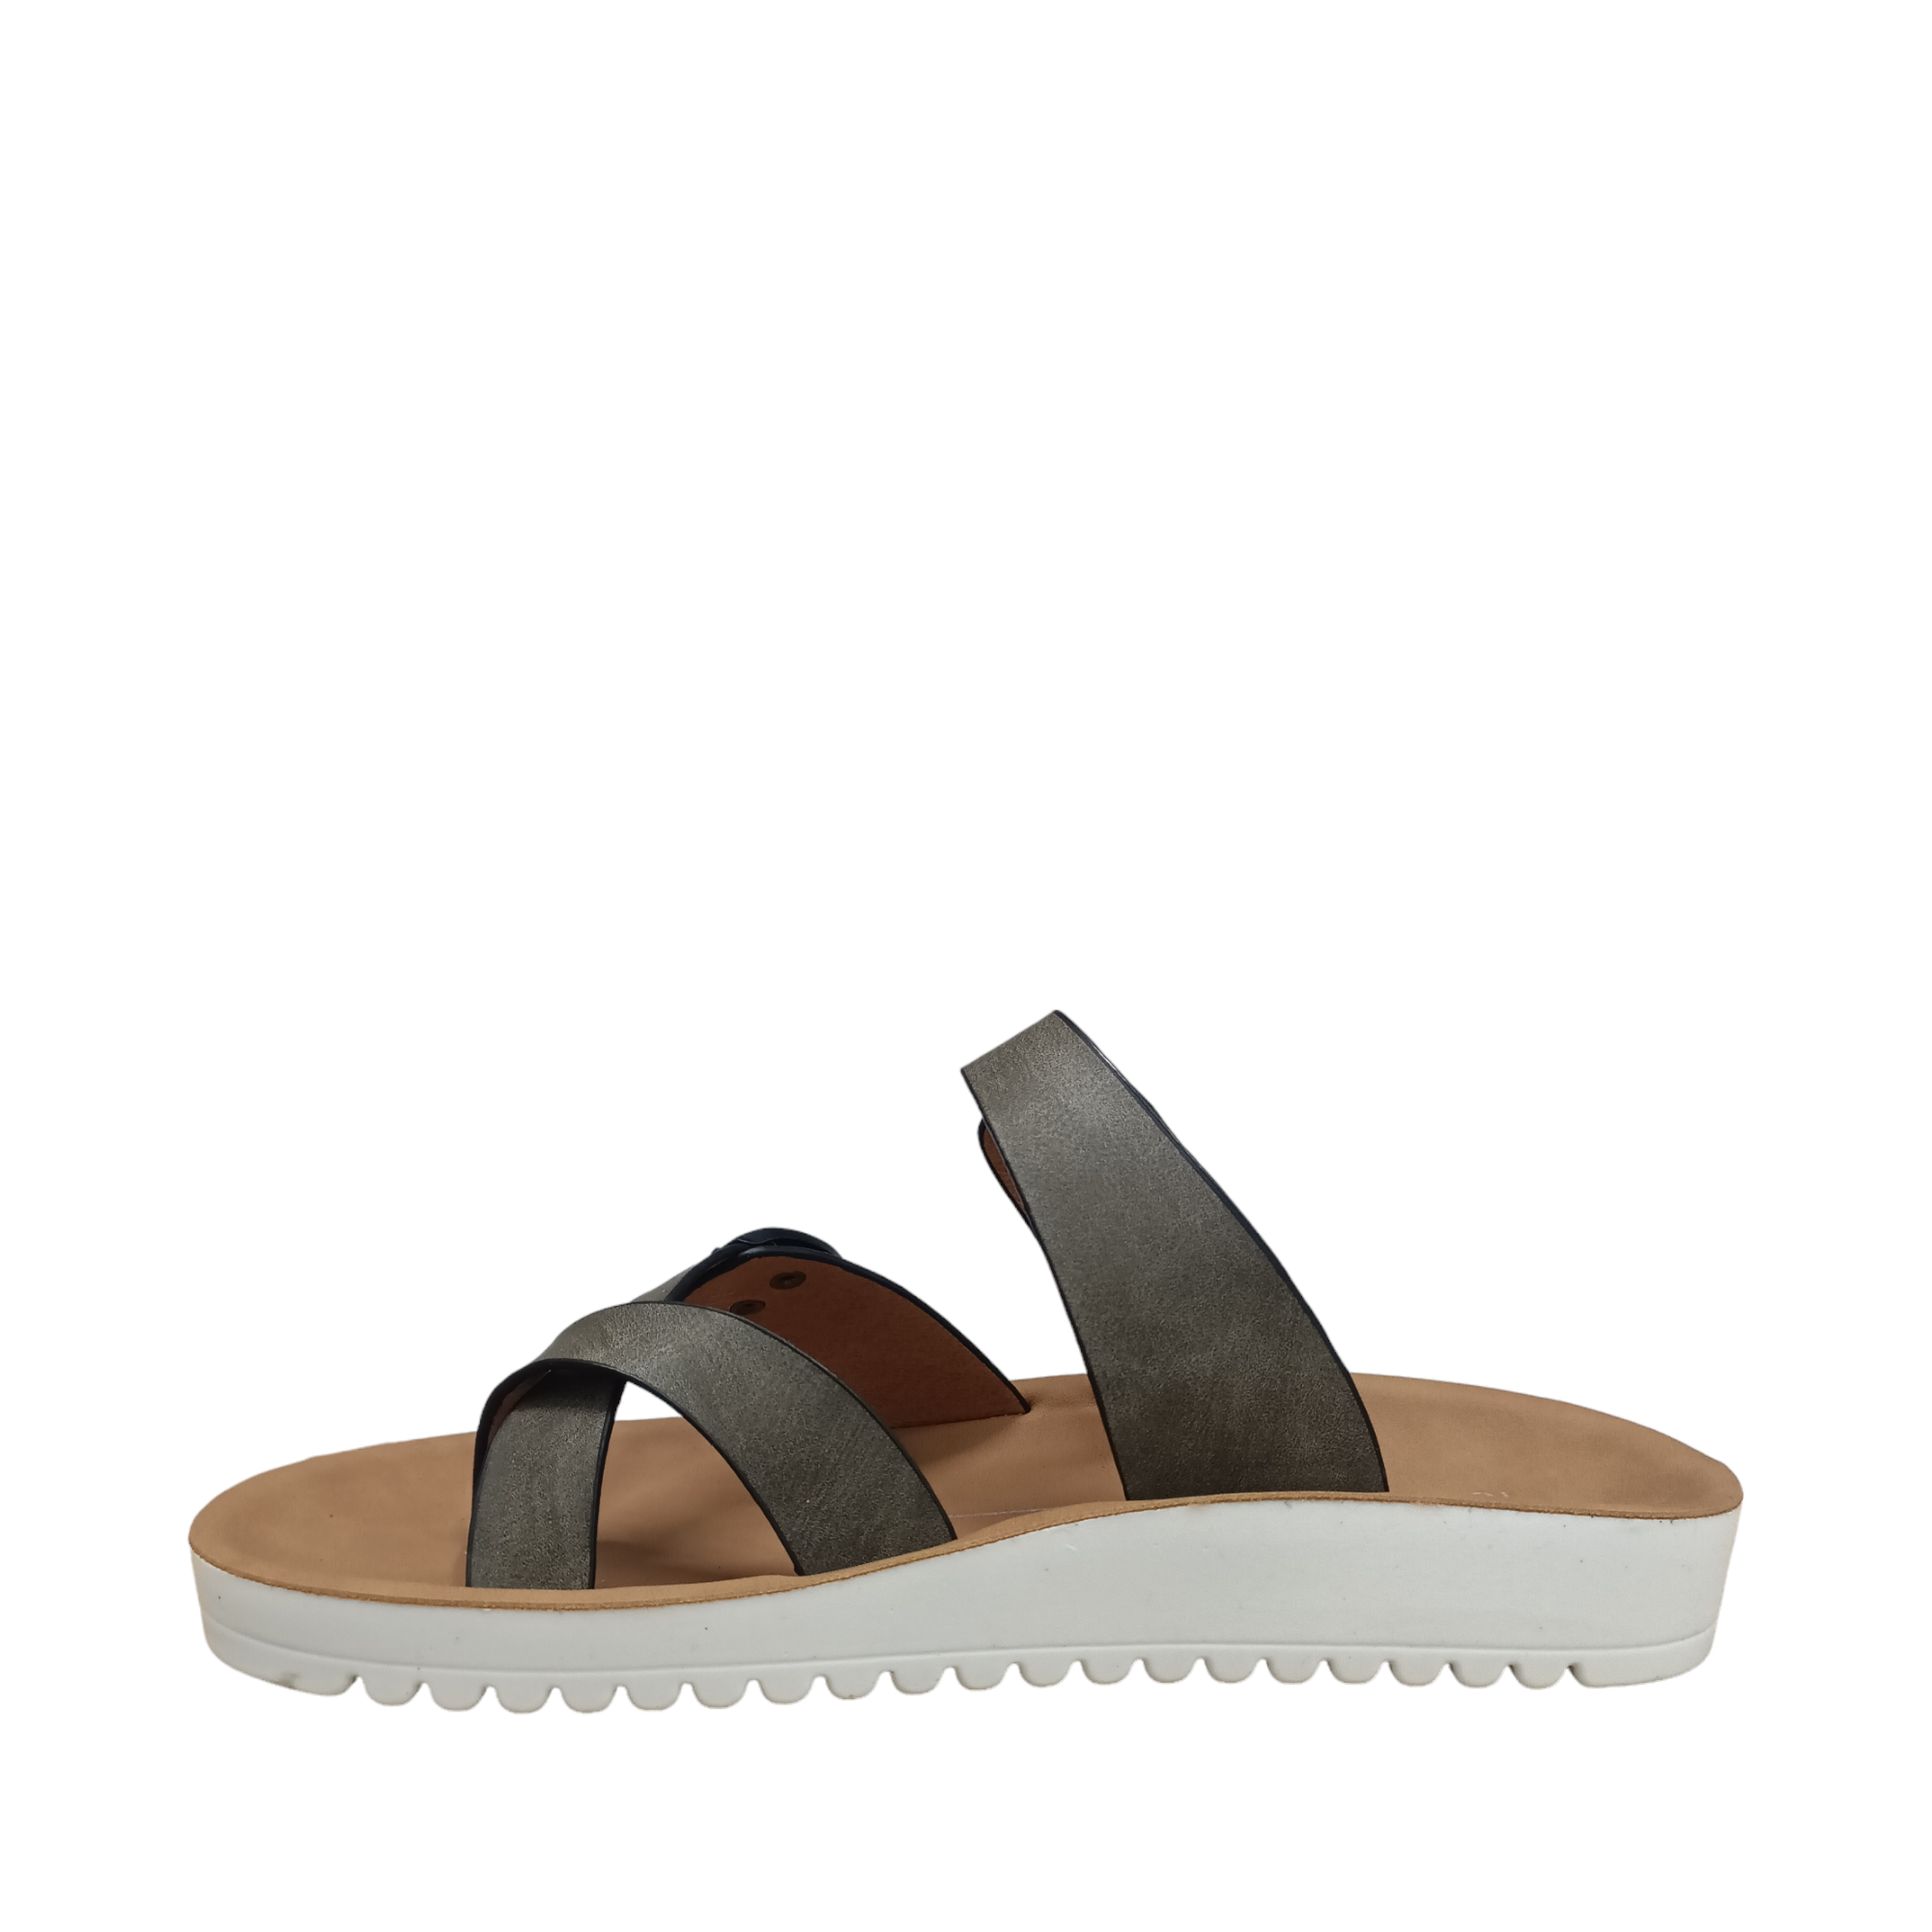 Nin - shoe&amp;me - Los Cabos - Jandals - Jandal, Summer, Womens